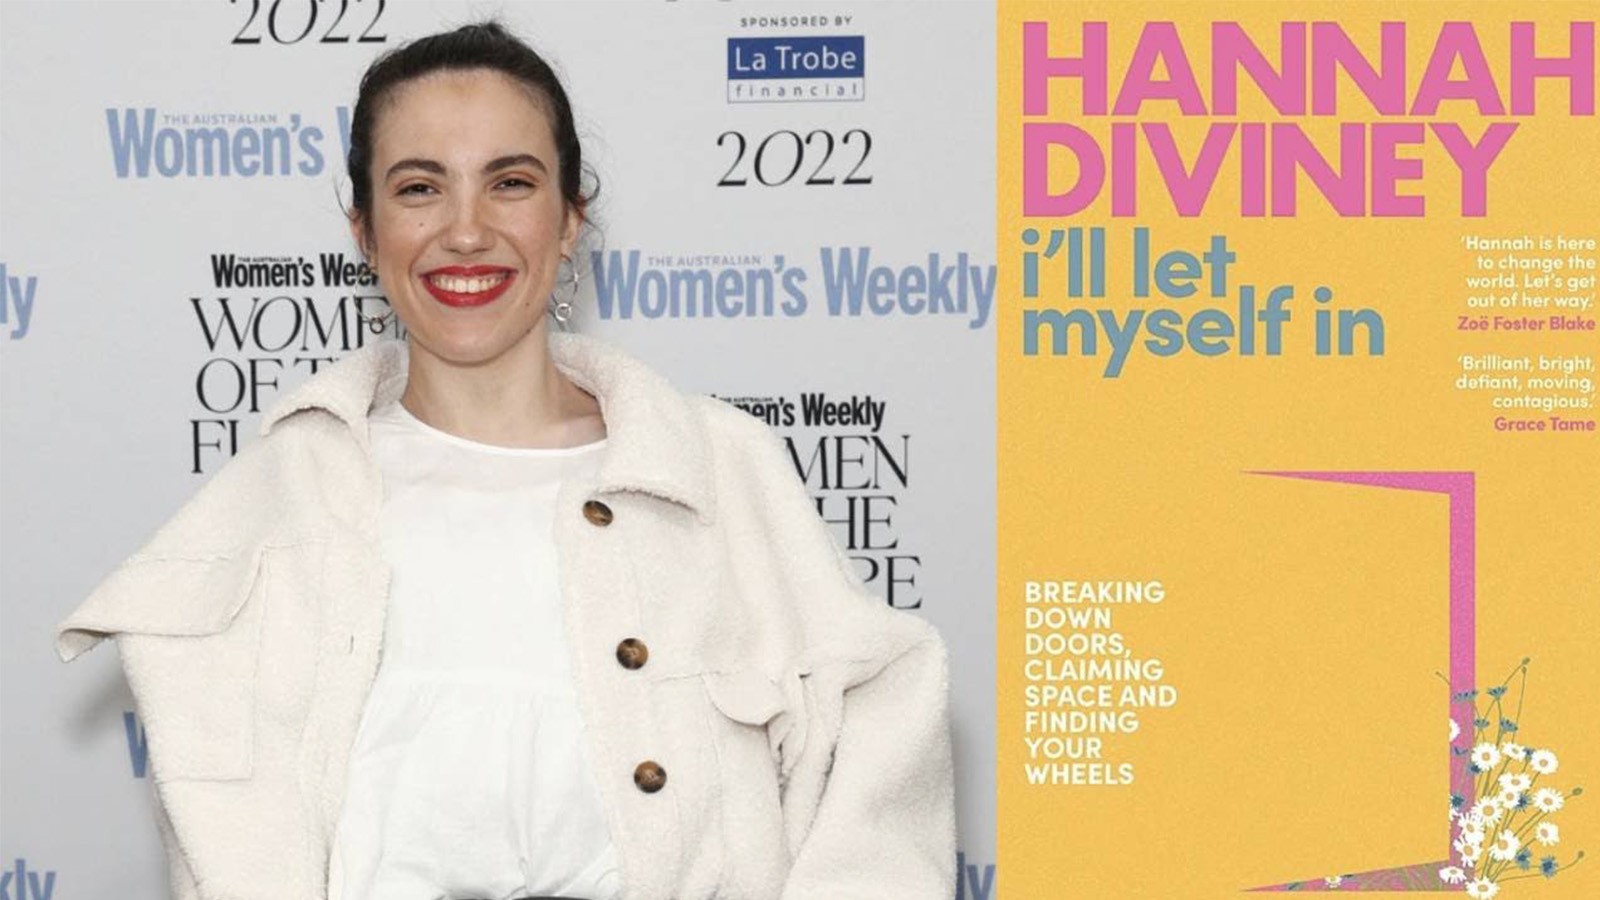 A woman with a white top is standing in front of a Women's Weekly media wall. Beside her is a large yellow book cover that reads 'Hannah Divieny I'll let myself in'